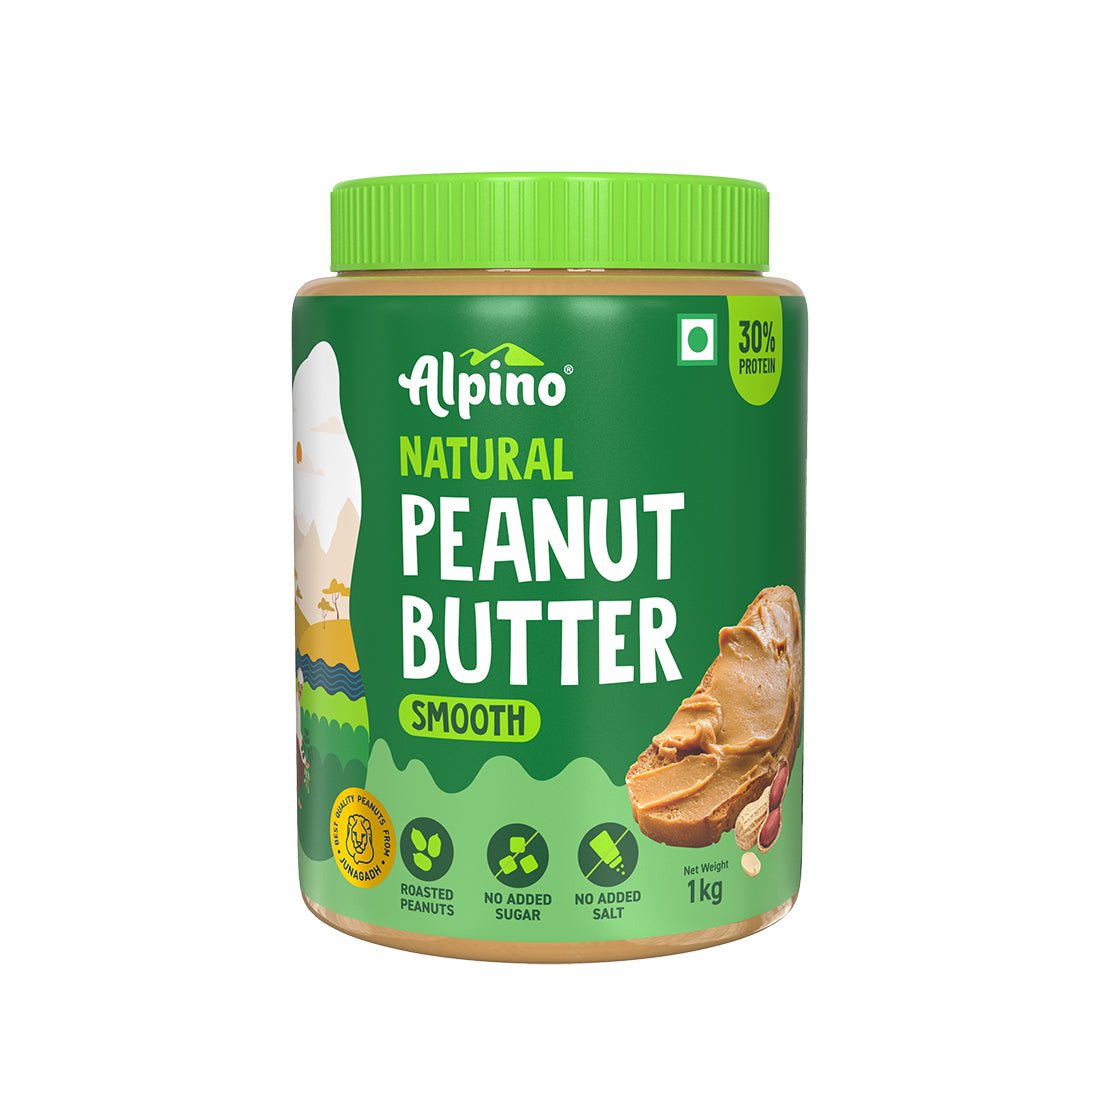 Alpino Natural Peanut Butter Smooth - Kreate- Spreads